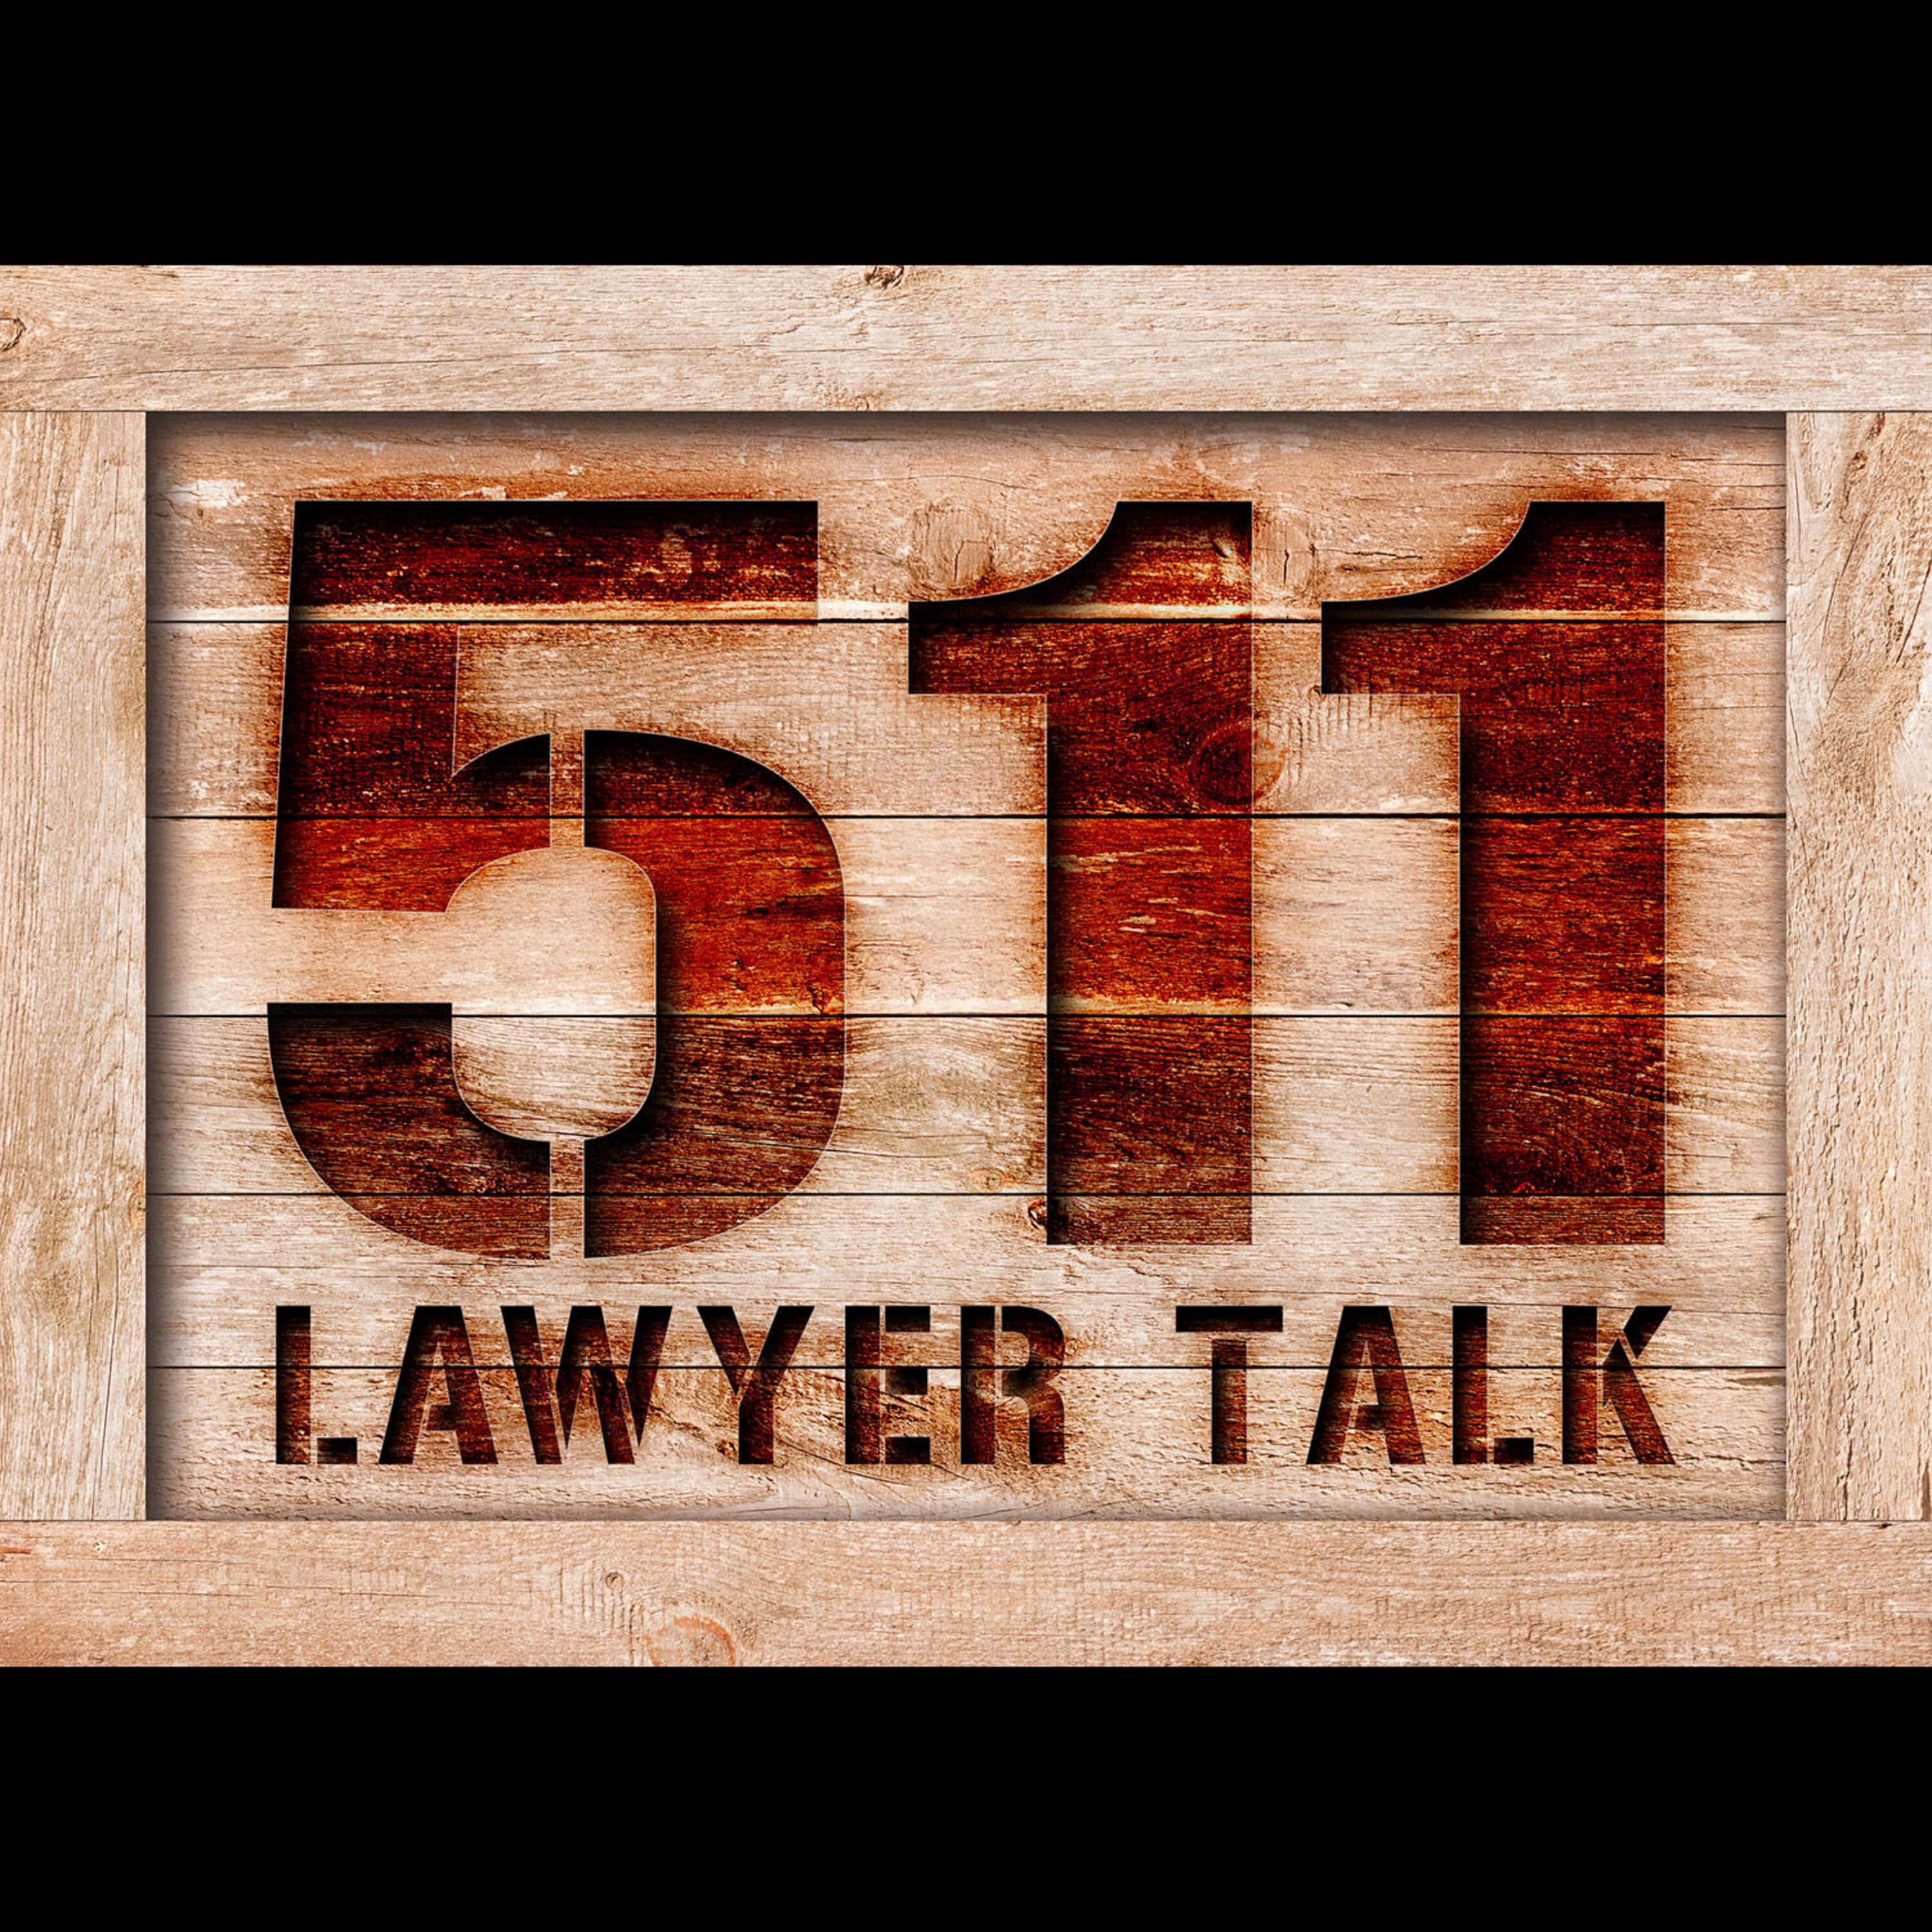 Lawyer Talk: Off the Record